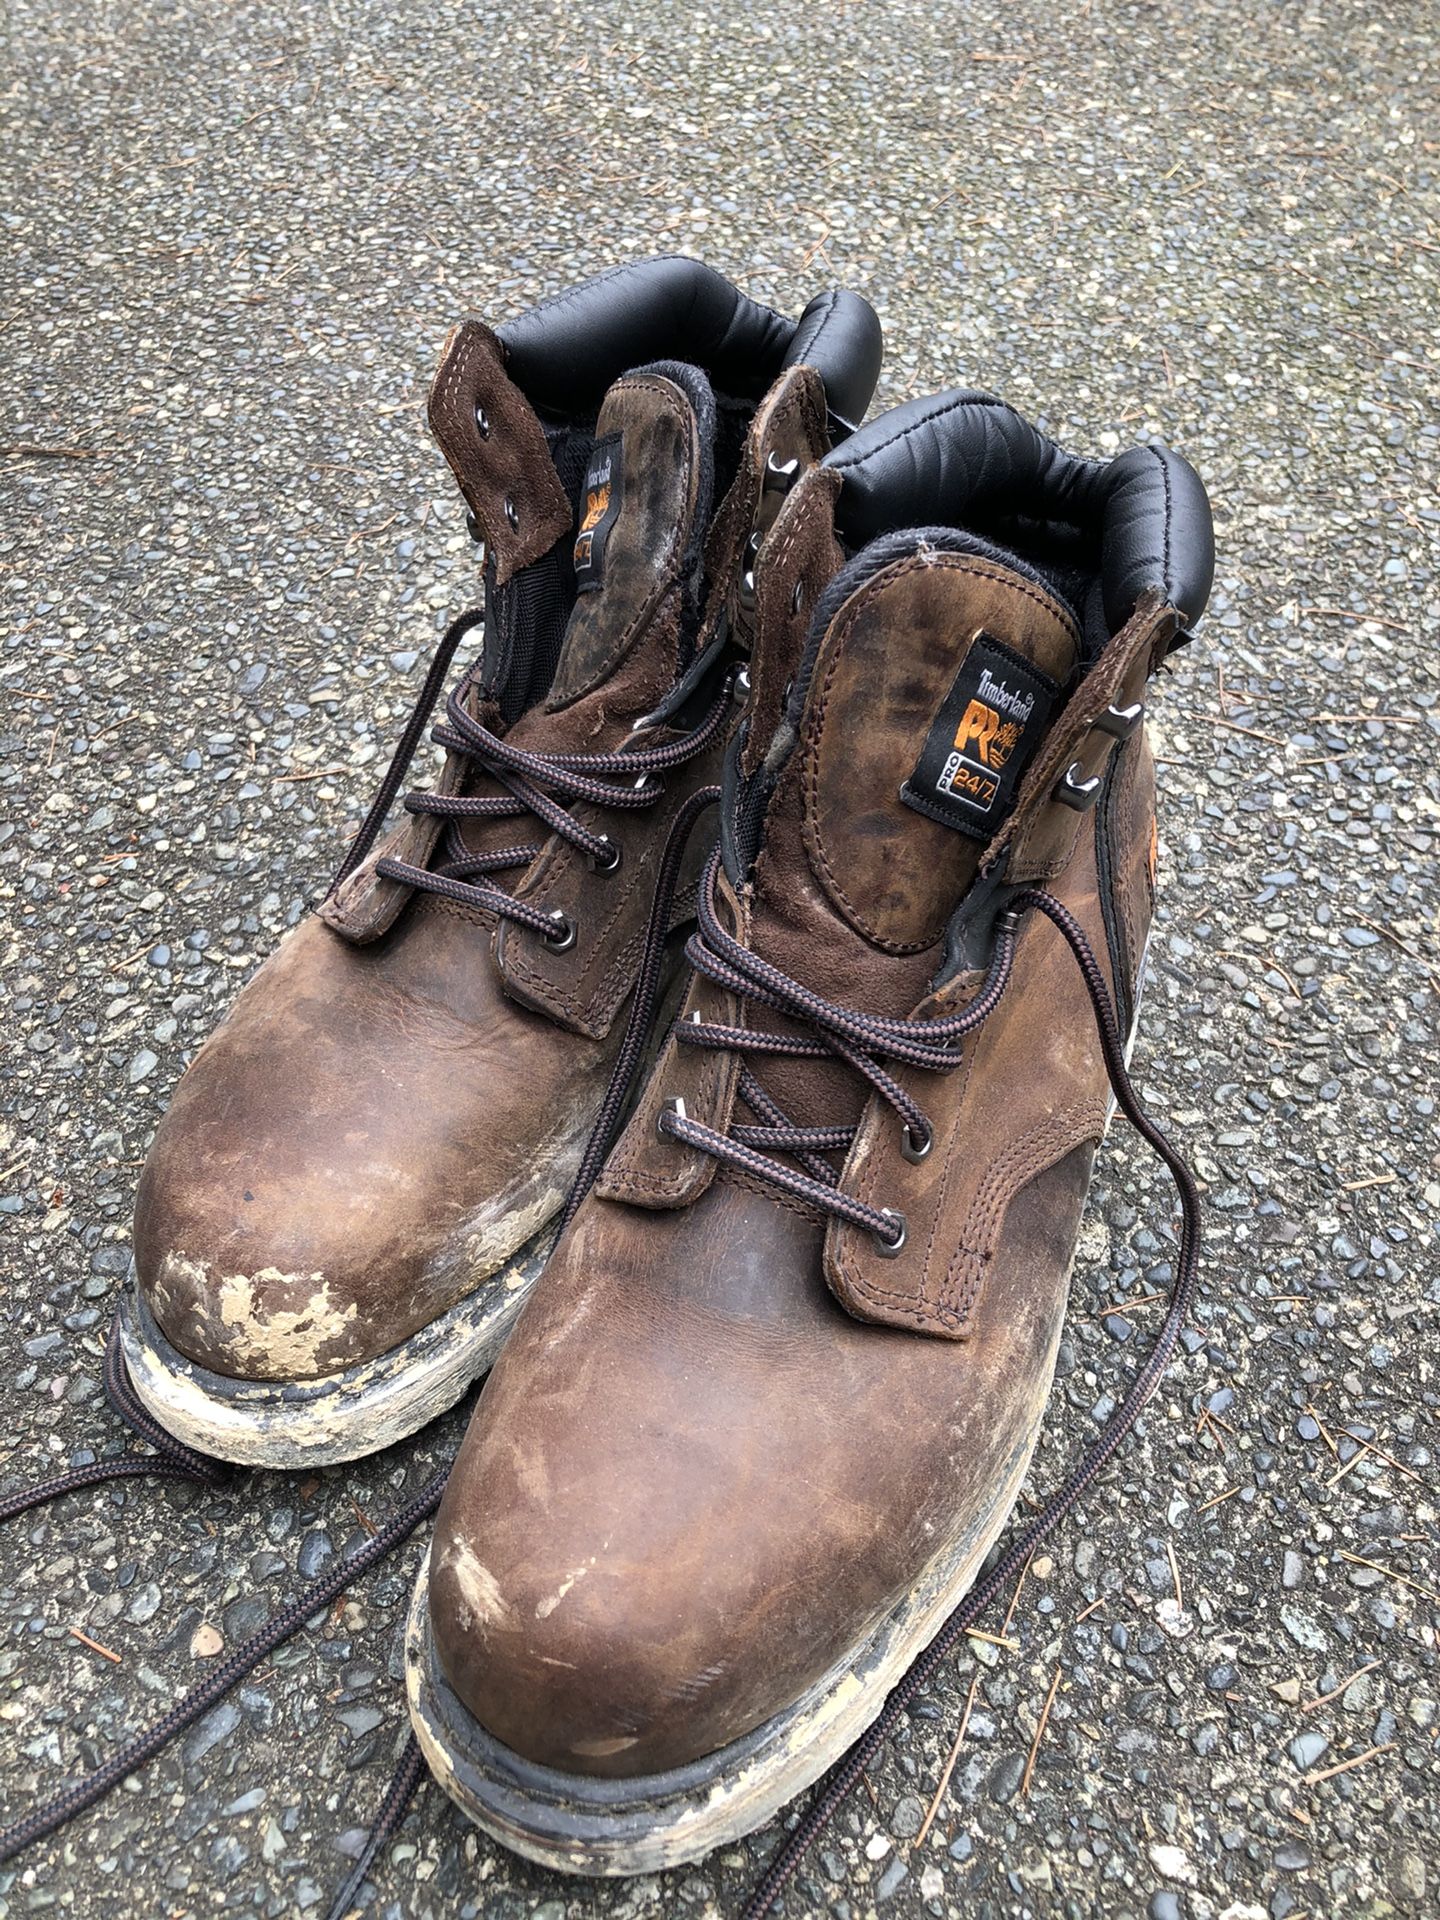 Lightly used Men’s Steel toe work boots size 12